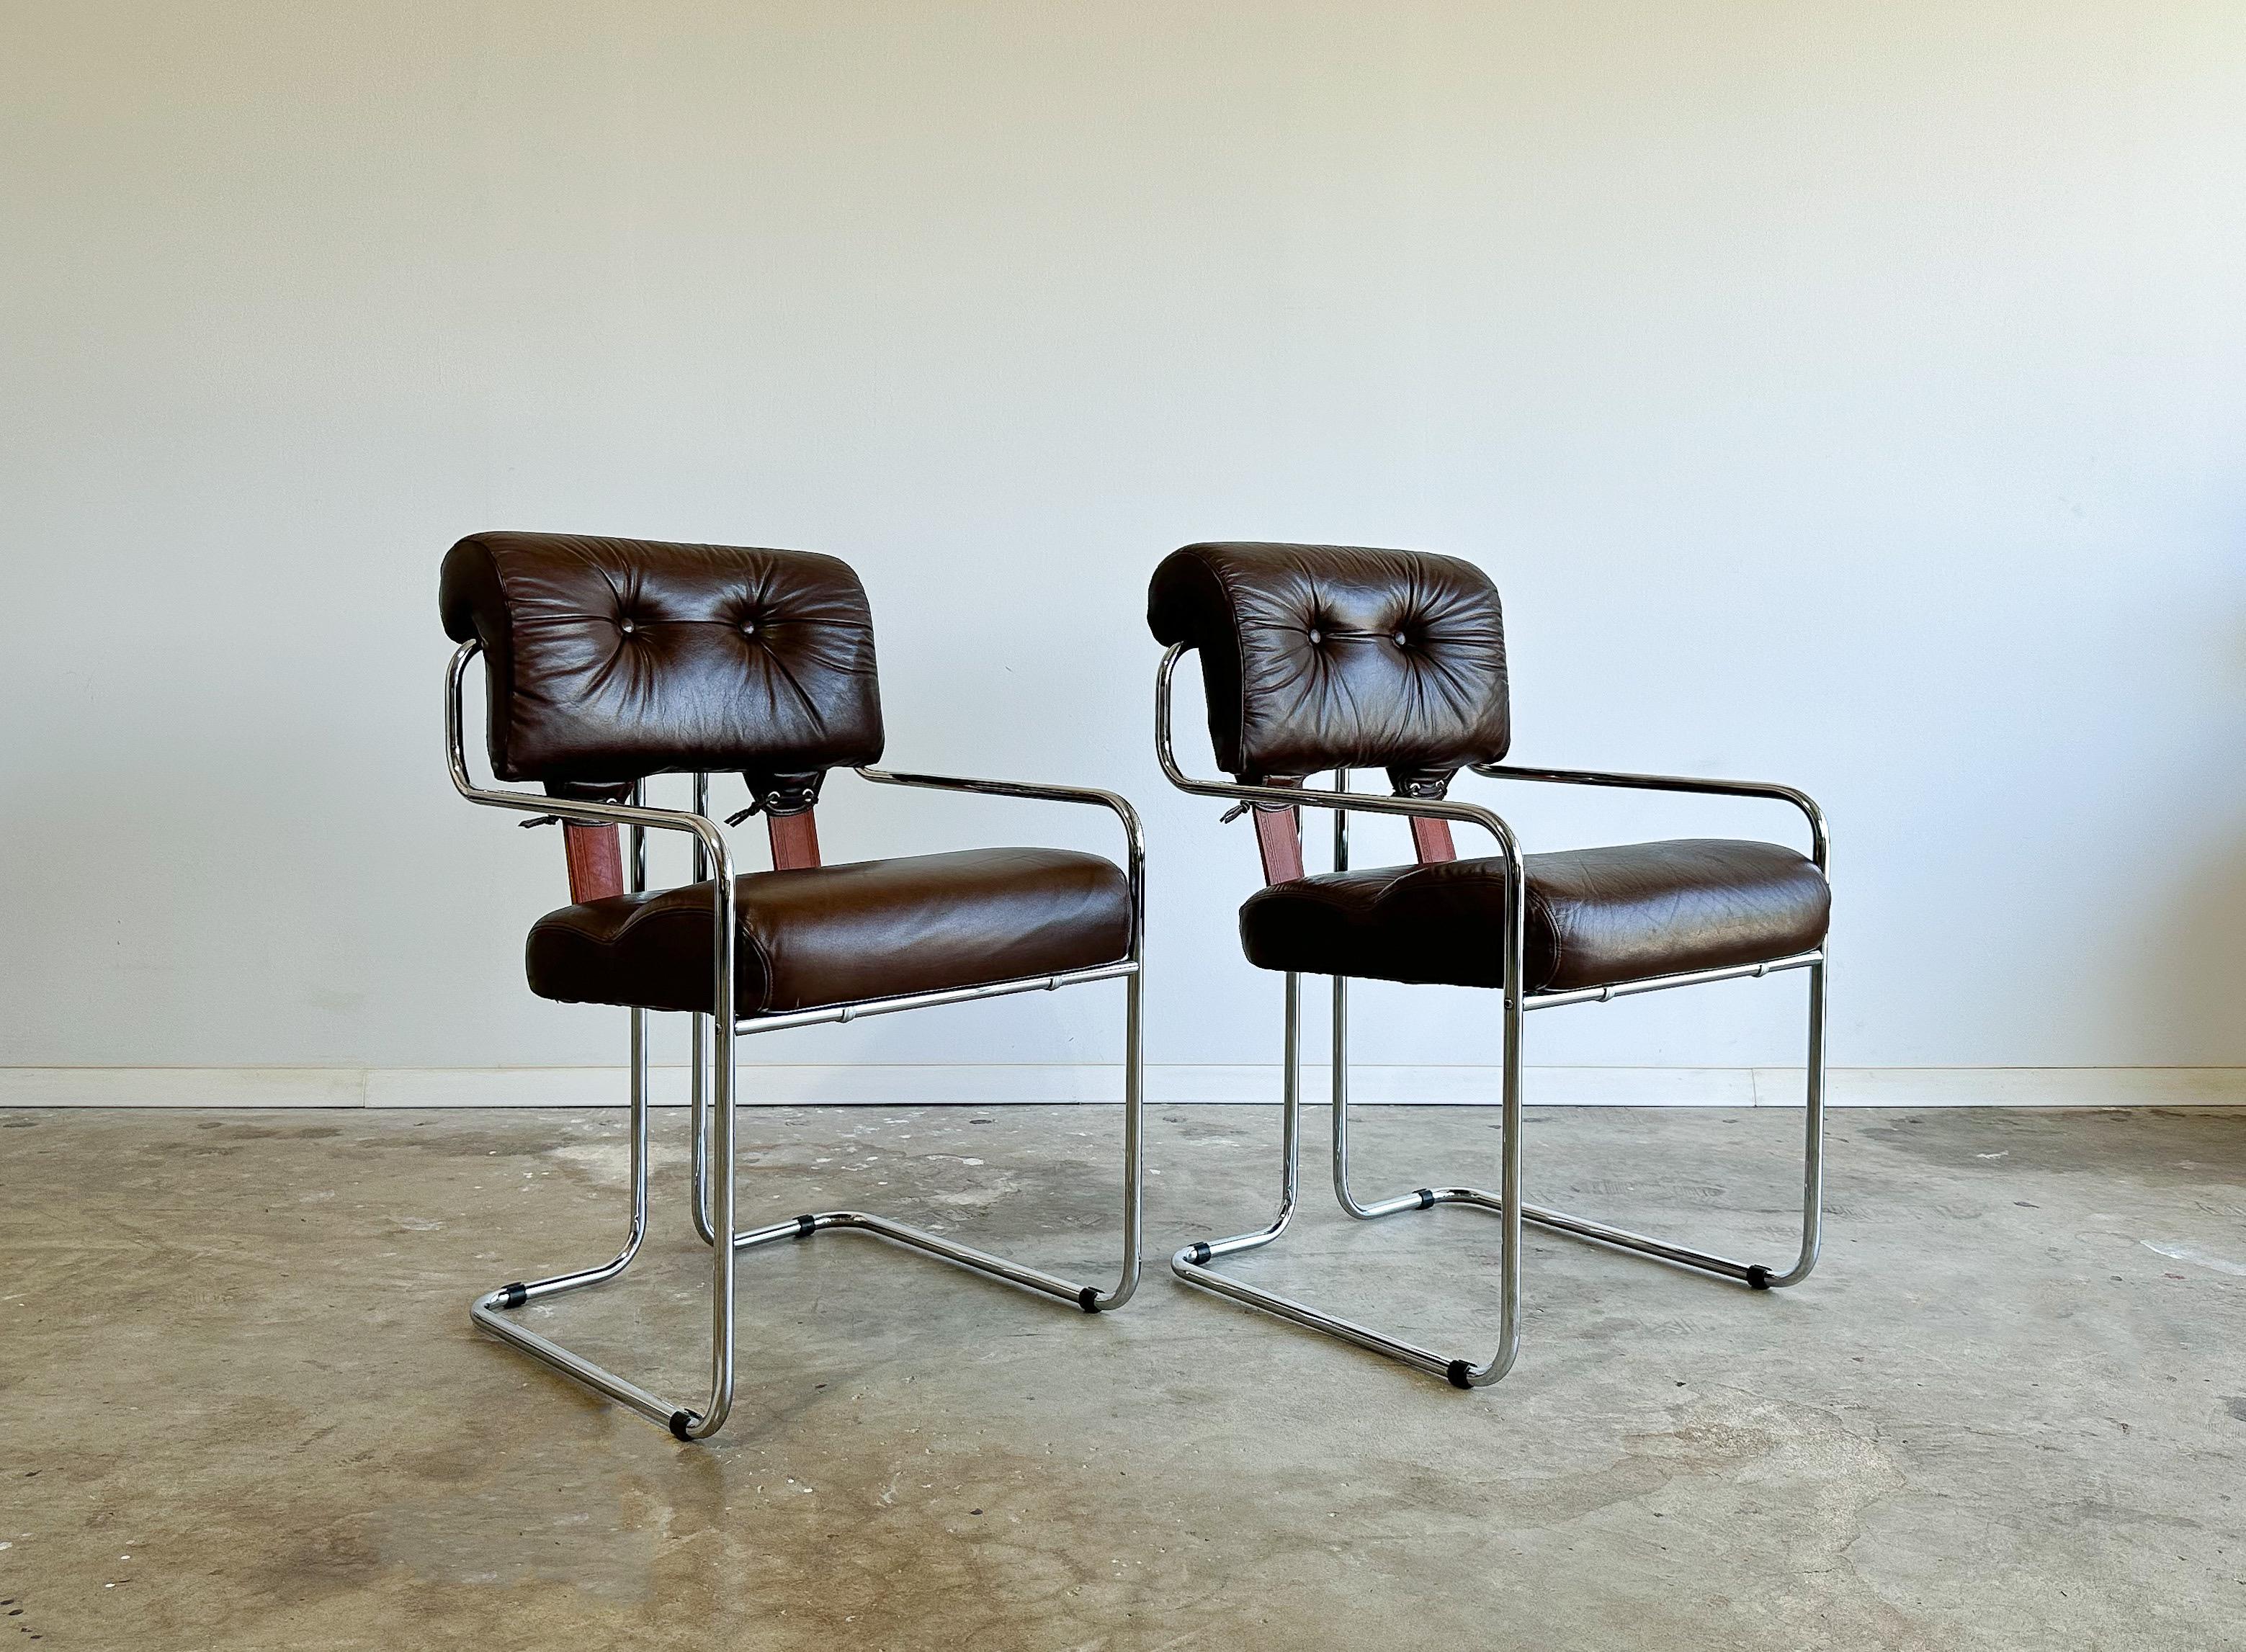 Offered is a beautiful pair of Tucroma chairs designed by Guido Faleschini for I4Mariani, Italy. 

These have a wonderful combination of materials: rich chocolate brown leather and polished chrome tubular frames, accented by embossed natural saddle